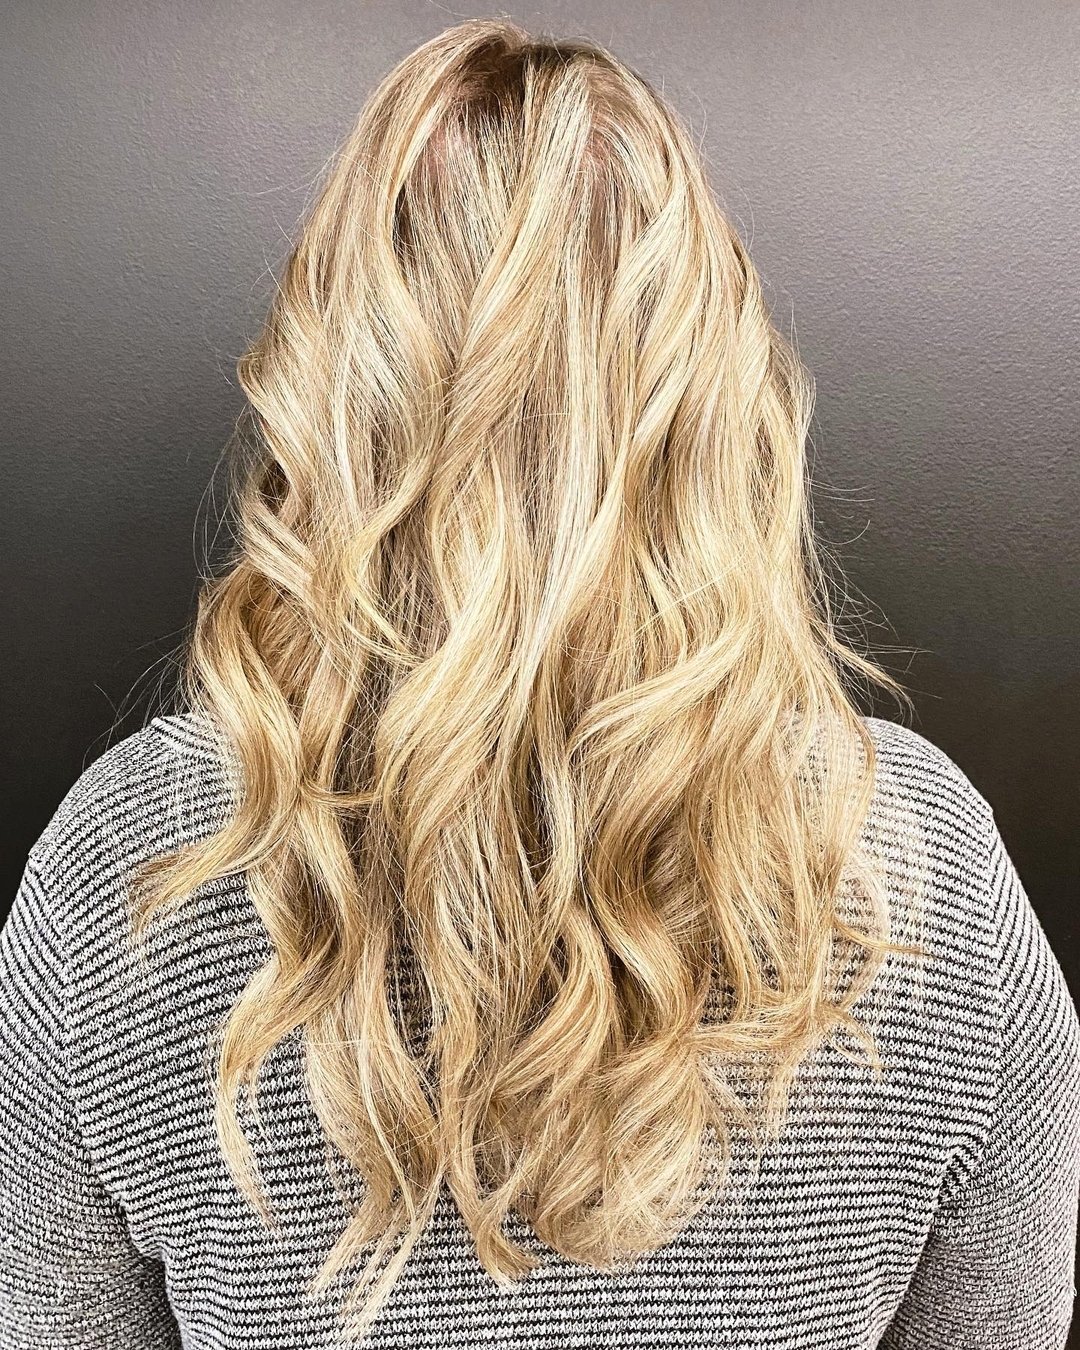 Dime Kari got some fresh foils 💛

Styled with Bumble and bumble Hairdresser&rsquo;s Invisible Oil, Hairdresser&rsquo;s Invisible Oil Ultra Rich Hyaluronic Treatment Lotion and Thickening Go Big Treatment Spray 

#dimelife #feelinlikeadime #bumbleand